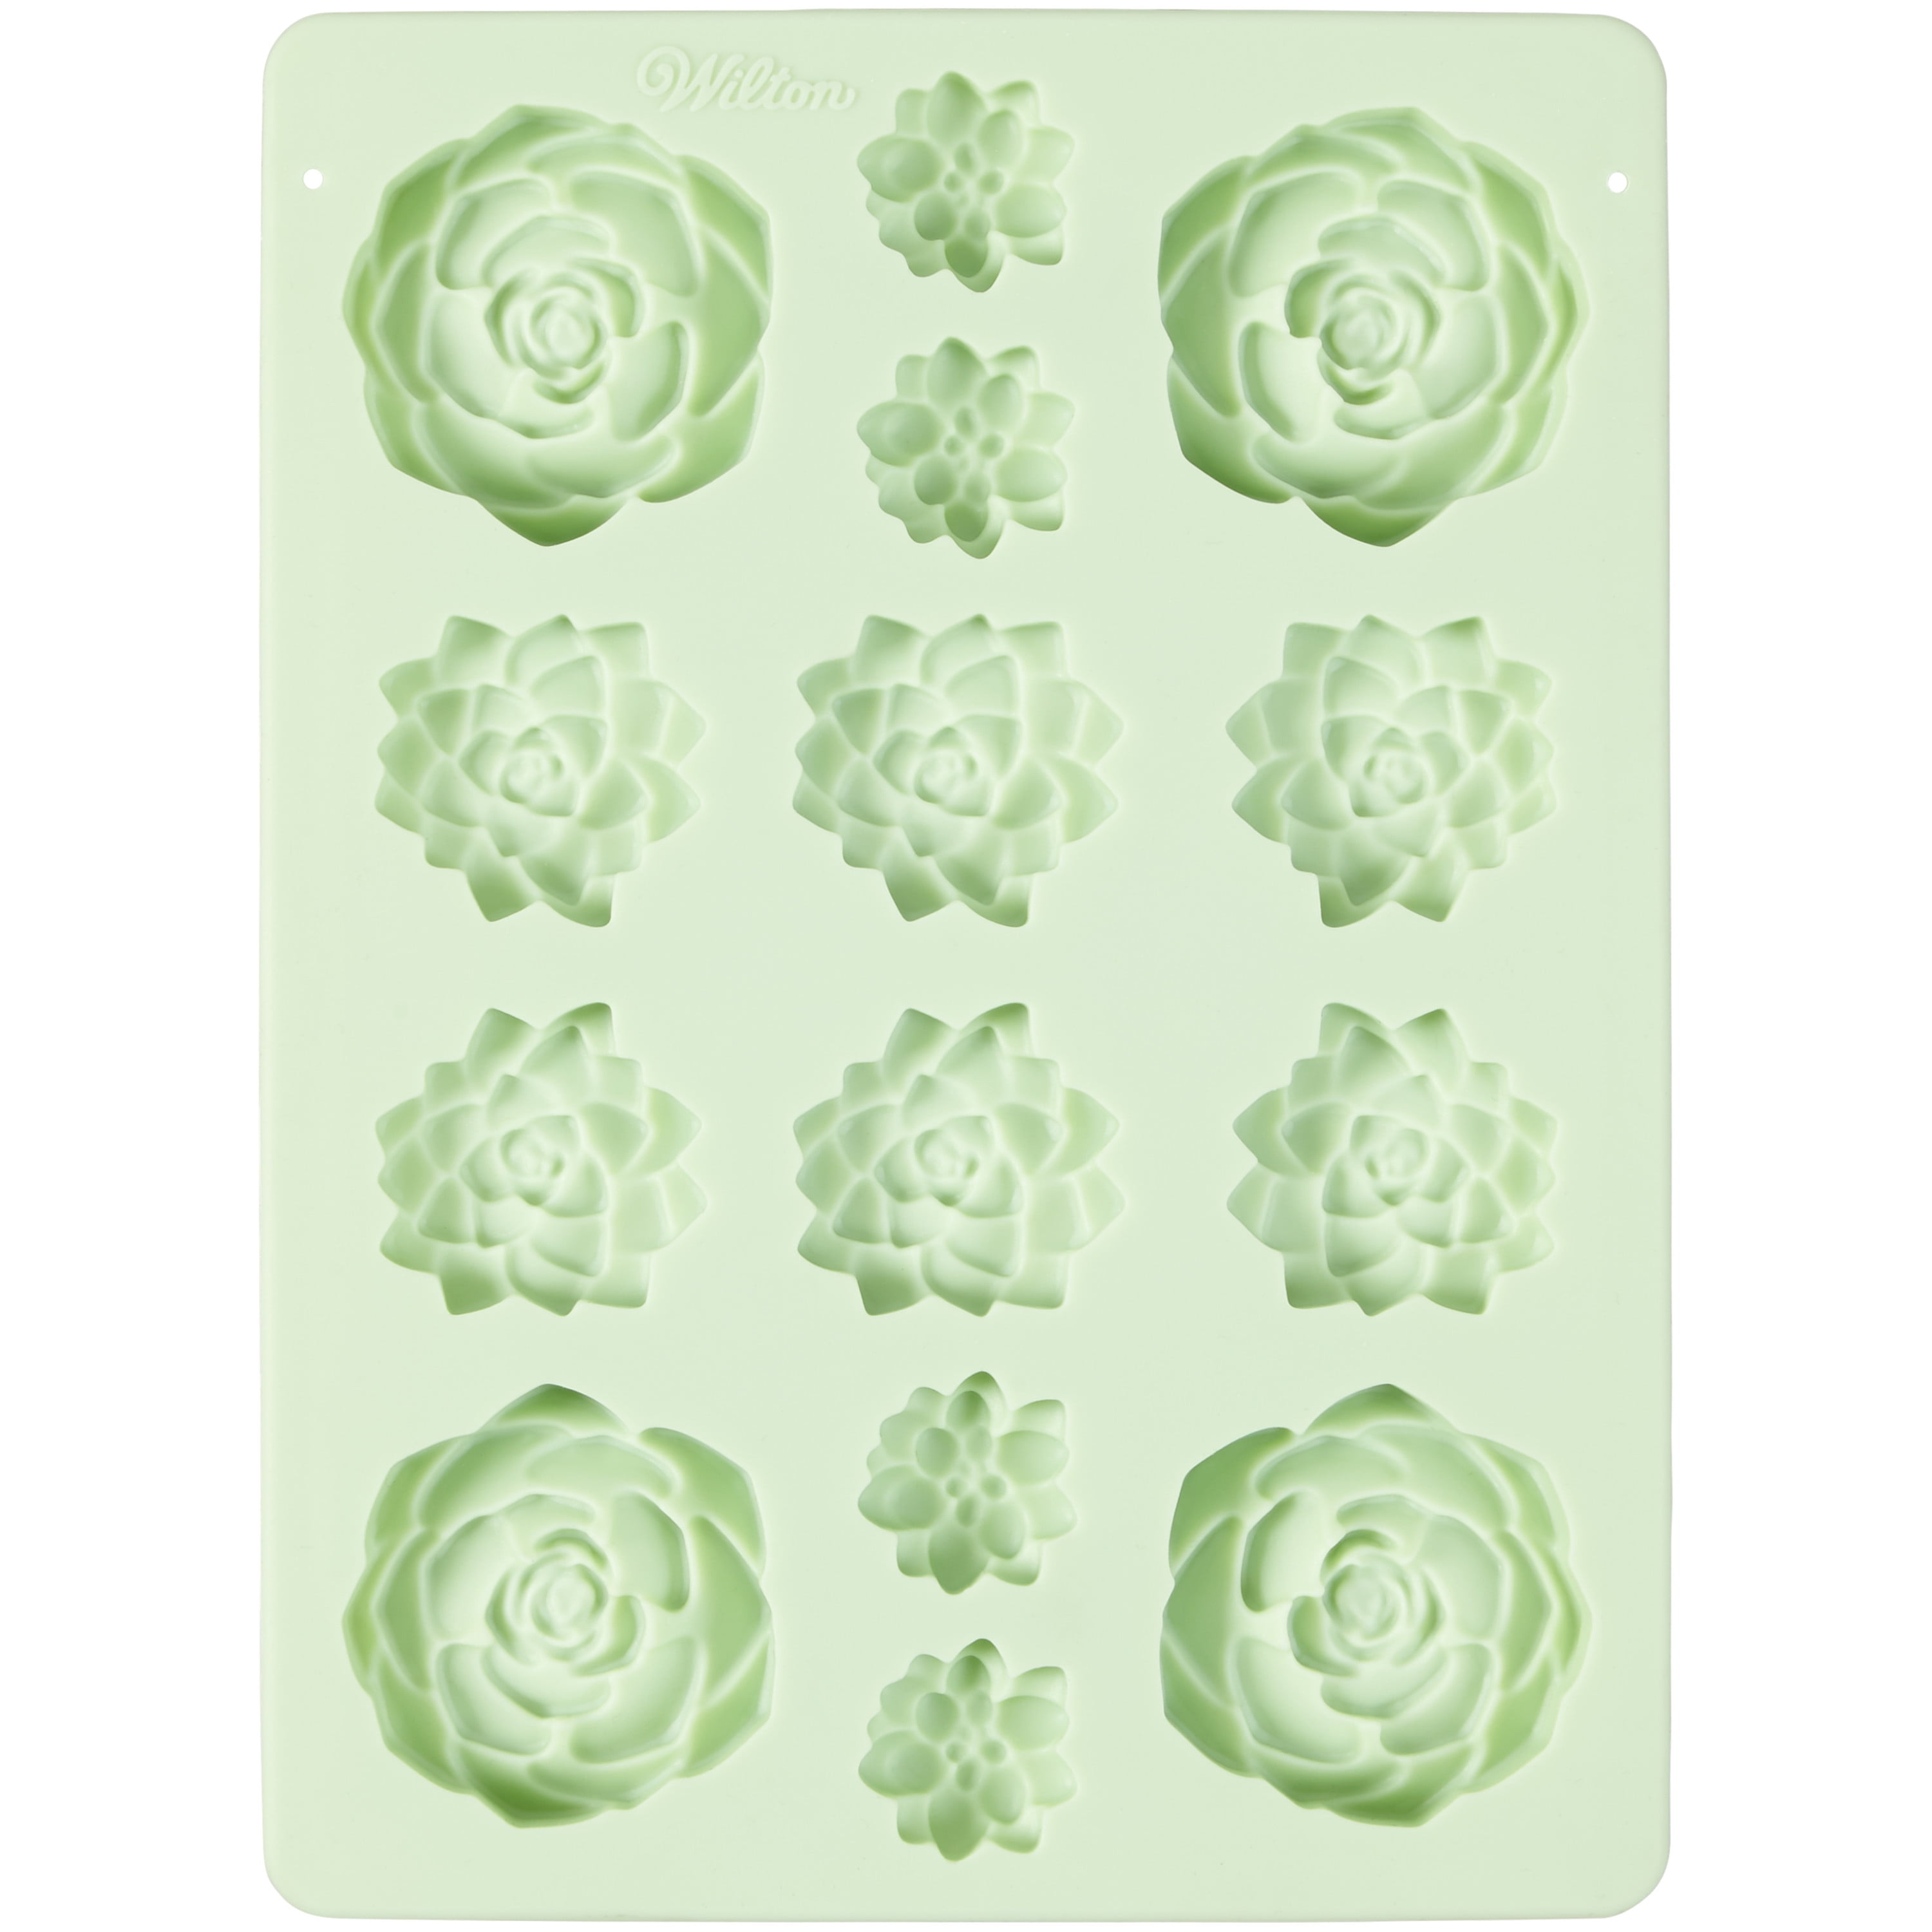 Cactus Chocolate Candy Mold  Silicone Cactus Mold for Cake Decorating,  Cupcake Toppers, Gummies - Sweets & Treats™